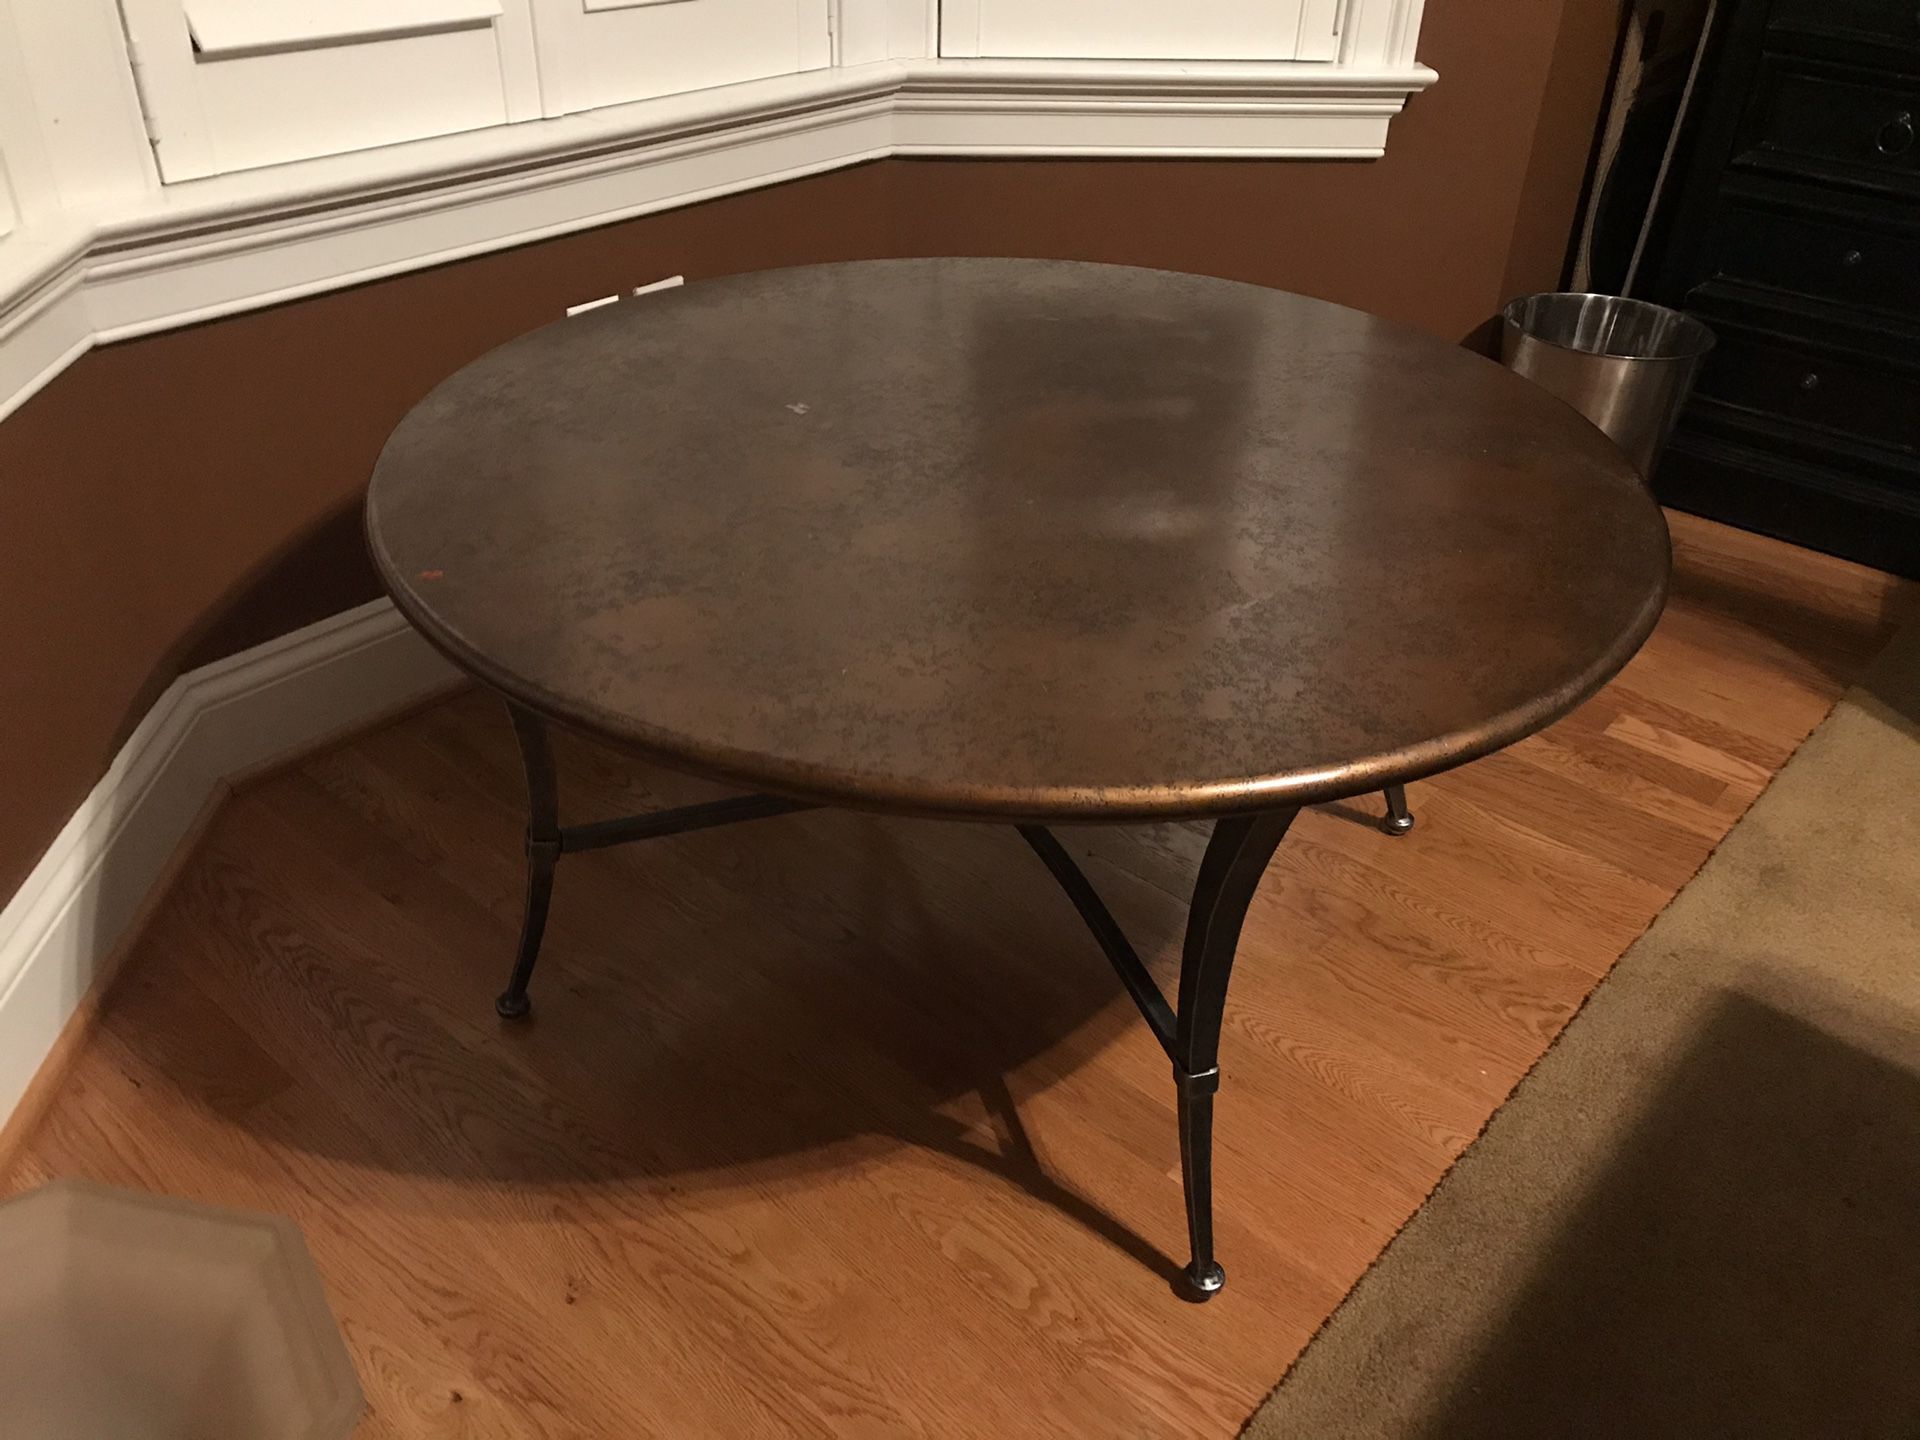 Free: Coffee table round 37”